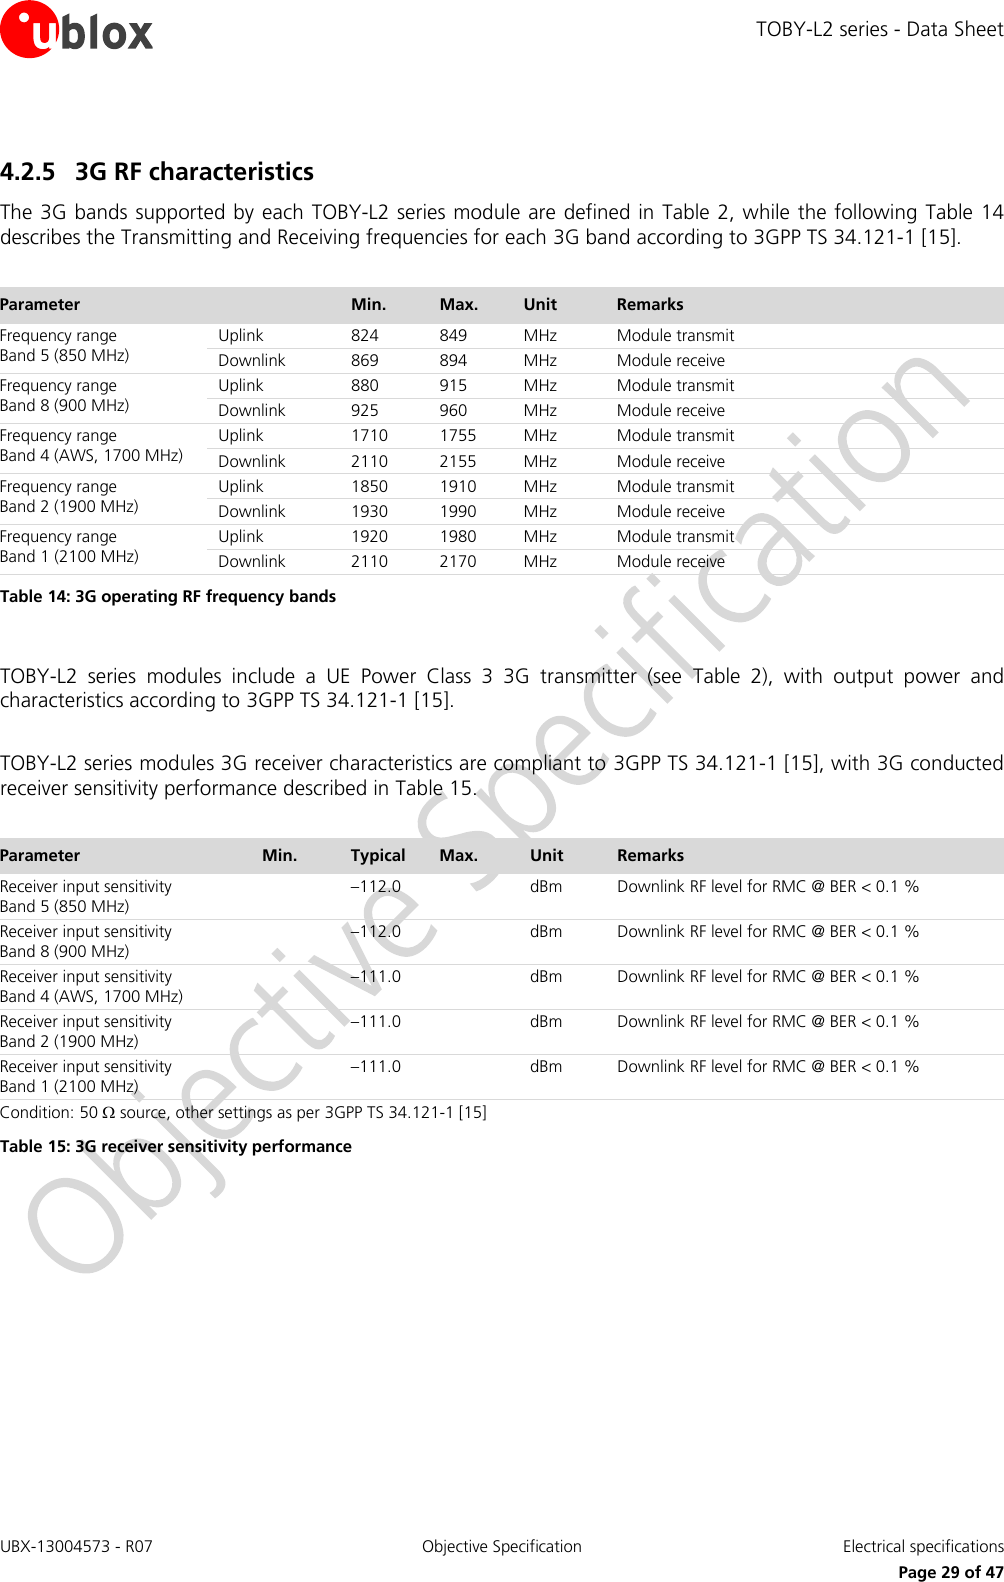 TOBY-L2 series - Data Sheet UBX-13004573 - R07  Objective Specification  Electrical specifications   Page 29 of 47 4.2.5 3G RF characteristics The 3G bands supported by each  TOBY-L2 series module are defined in Table 2, while the following Table 14 describes the Transmitting and Receiving frequencies for each 3G band according to 3GPP TS 34.121-1 [15].  Parameter  Min. Max. Unit Remarks Frequency range Band 5 (850 MHz) Uplink 824 849 MHz Module transmit Downlink 869 894 MHz Module receive Frequency range Band 8 (900 MHz) Uplink 880 915 MHz Module transmit Downlink 925 960 MHz Module receive Frequency range Band 4 (AWS, 1700 MHz) Uplink 1710 1755 MHz Module transmit Downlink 2110 2155 MHz Module receive Frequency range Band 2 (1900 MHz) Uplink 1850 1910 MHz Module transmit Downlink 1930 1990 MHz Module receive Frequency range Band 1 (2100 MHz) Uplink 1920 1980 MHz Module transmit Downlink 2110 2170 MHz Module receive Table 14: 3G operating RF frequency bands  TOBY-L2  series  modules  include  a  UE  Power  Class  3  3G  transmitter  (see  Table  2),  with  output  power  and characteristics according to 3GPP TS 34.121-1 [15].  TOBY-L2 series modules 3G receiver characteristics are compliant to 3GPP TS 34.121-1 [15], with 3G conducted receiver sensitivity performance described in Table 15.  Parameter Min. Typical Max. Unit Remarks Receiver input sensitivity Band 5 (850 MHz)  –112.0  dBm Downlink RF level for RMC @ BER &lt; 0.1 % Receiver input sensitivity Band 8 (900 MHz)  –112.0  dBm Downlink RF level for RMC @ BER &lt; 0.1 % Receiver input sensitivity Band 4 (AWS, 1700 MHz)  –111.0  dBm Downlink RF level for RMC @ BER &lt; 0.1 % Receiver input sensitivity Band 2 (1900 MHz)  –111.0  dBm Downlink RF level for RMC @ BER &lt; 0.1 % Receiver input sensitivity Band 1 (2100 MHz)  –111.0  dBm Downlink RF level for RMC @ BER &lt; 0.1 % Condition: 50  source, other settings as per 3GPP TS 34.121-1 [15] Table 15: 3G receiver sensitivity performance  